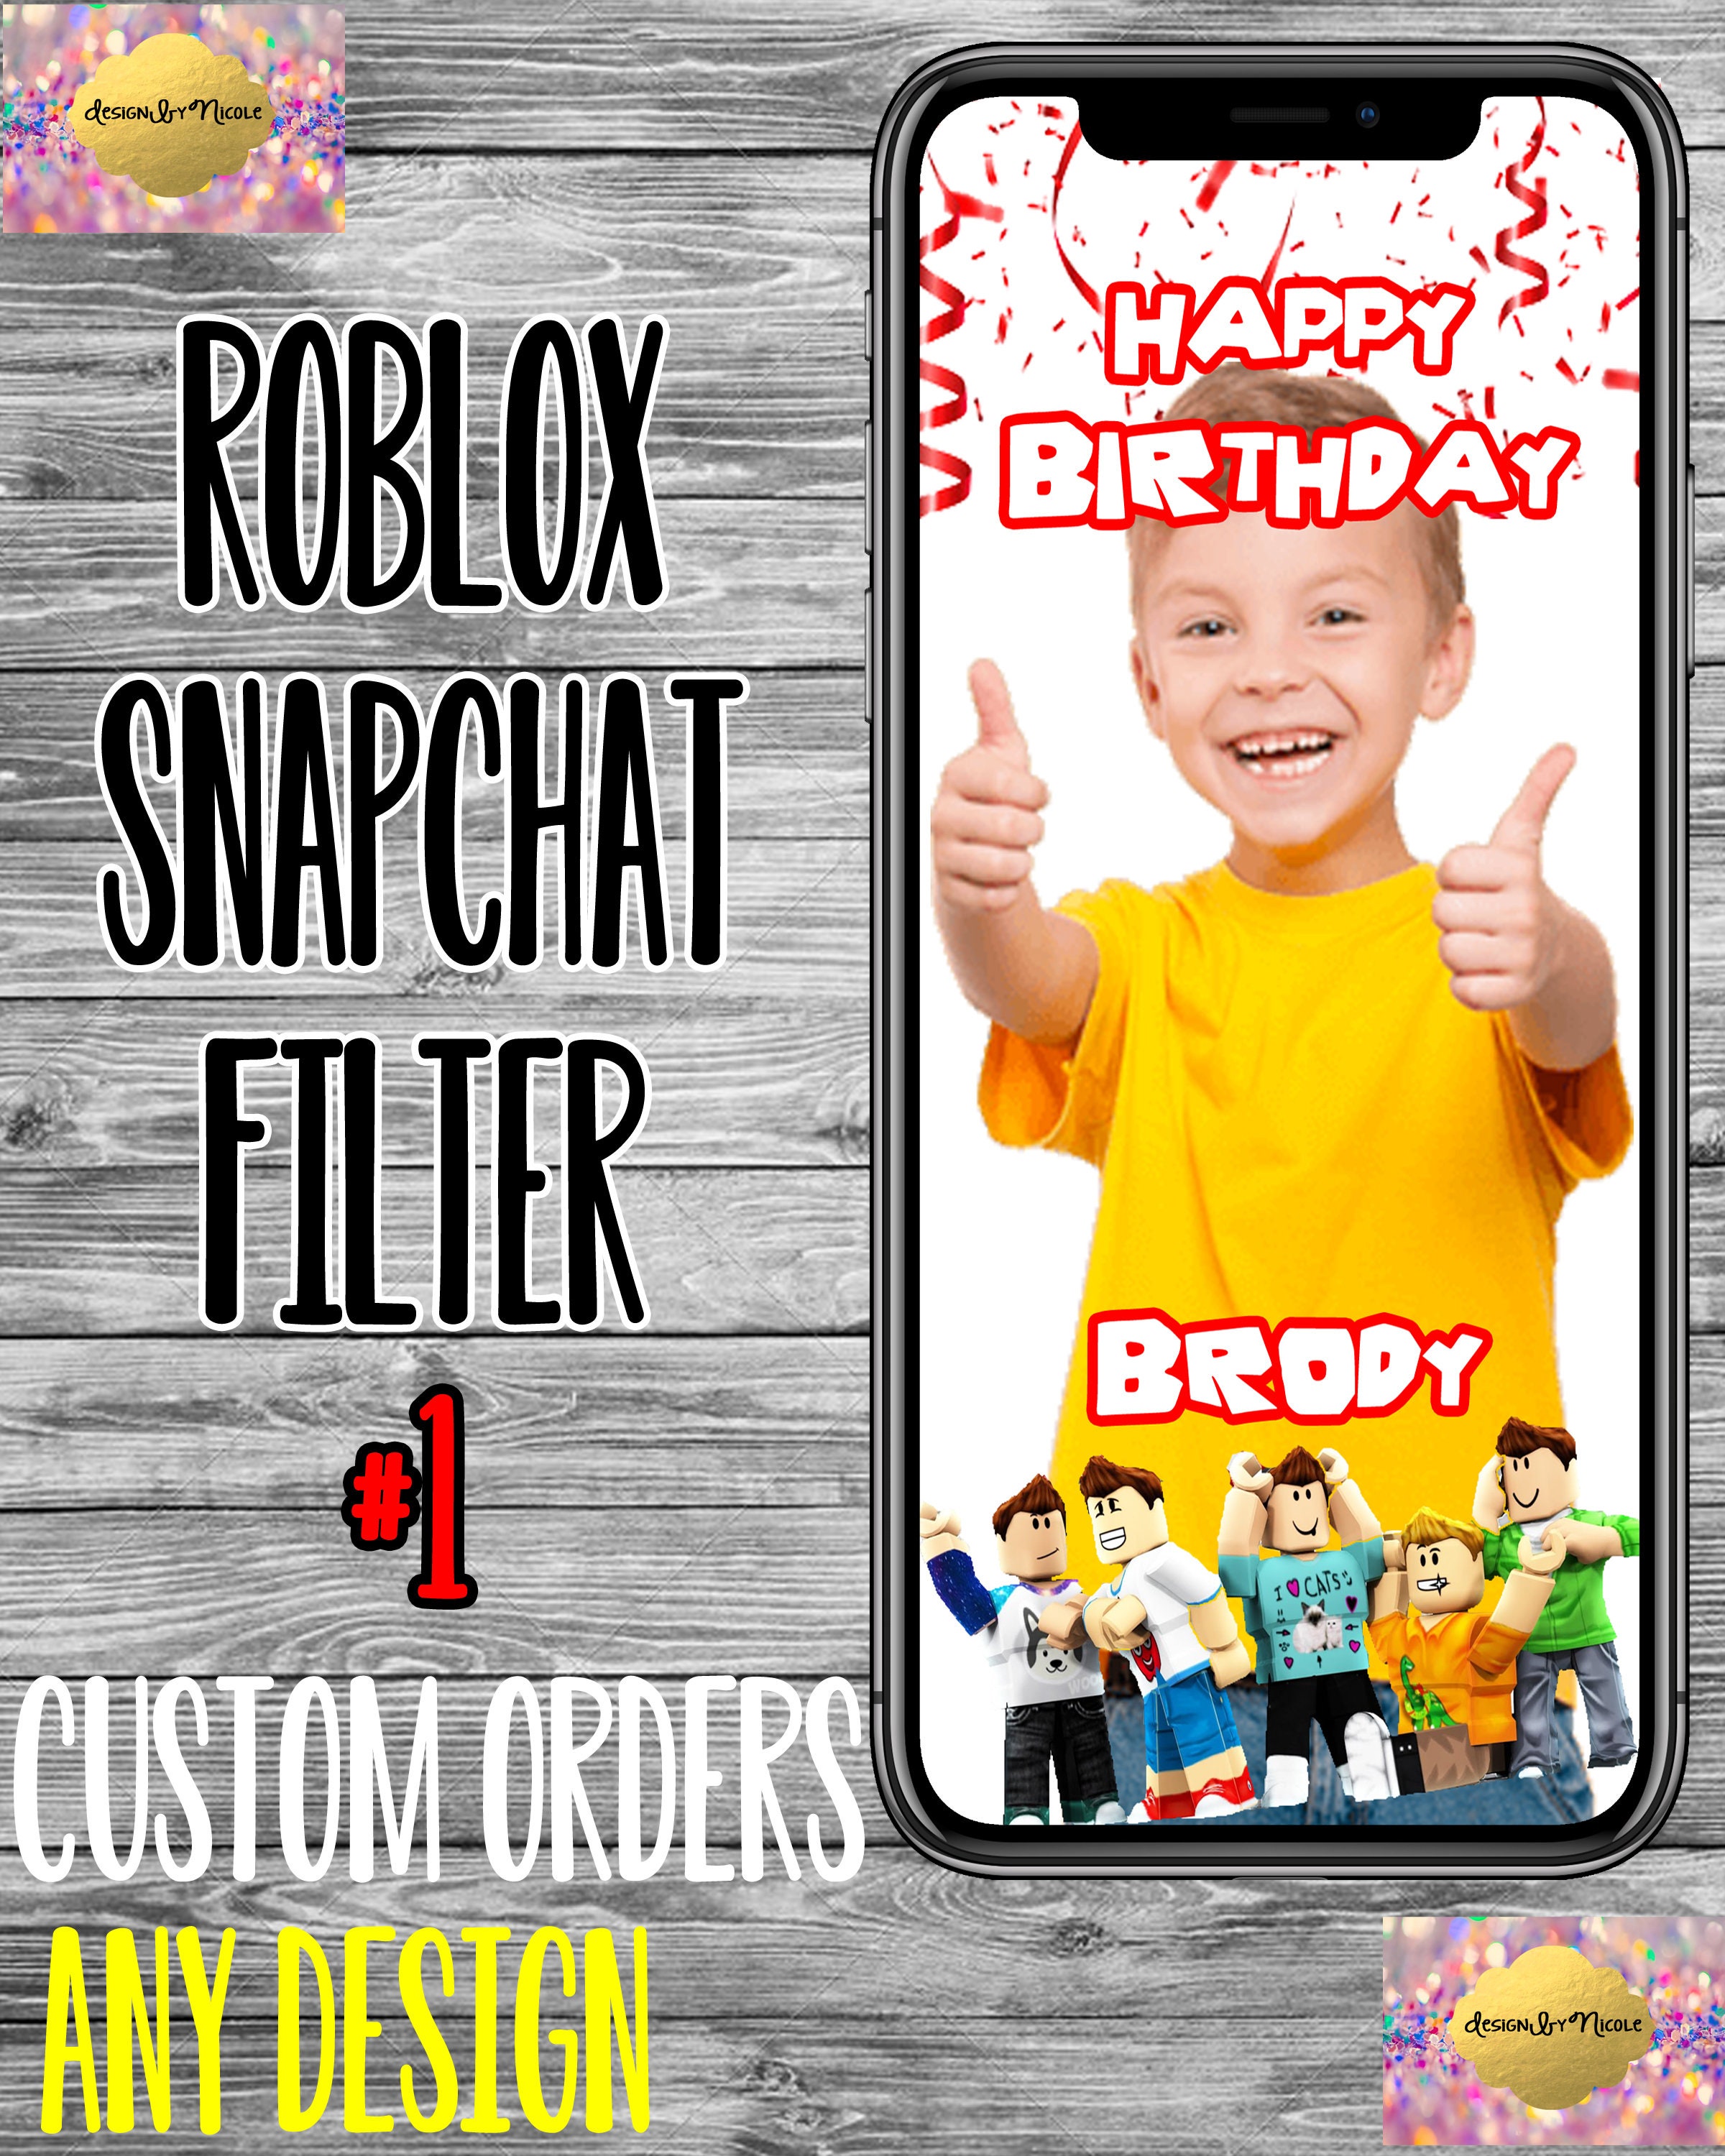 Roblox Snapchat Filter Roblox Code Free Robux 2019 - roblox nuclear plant tycoon robuxy gilathiss